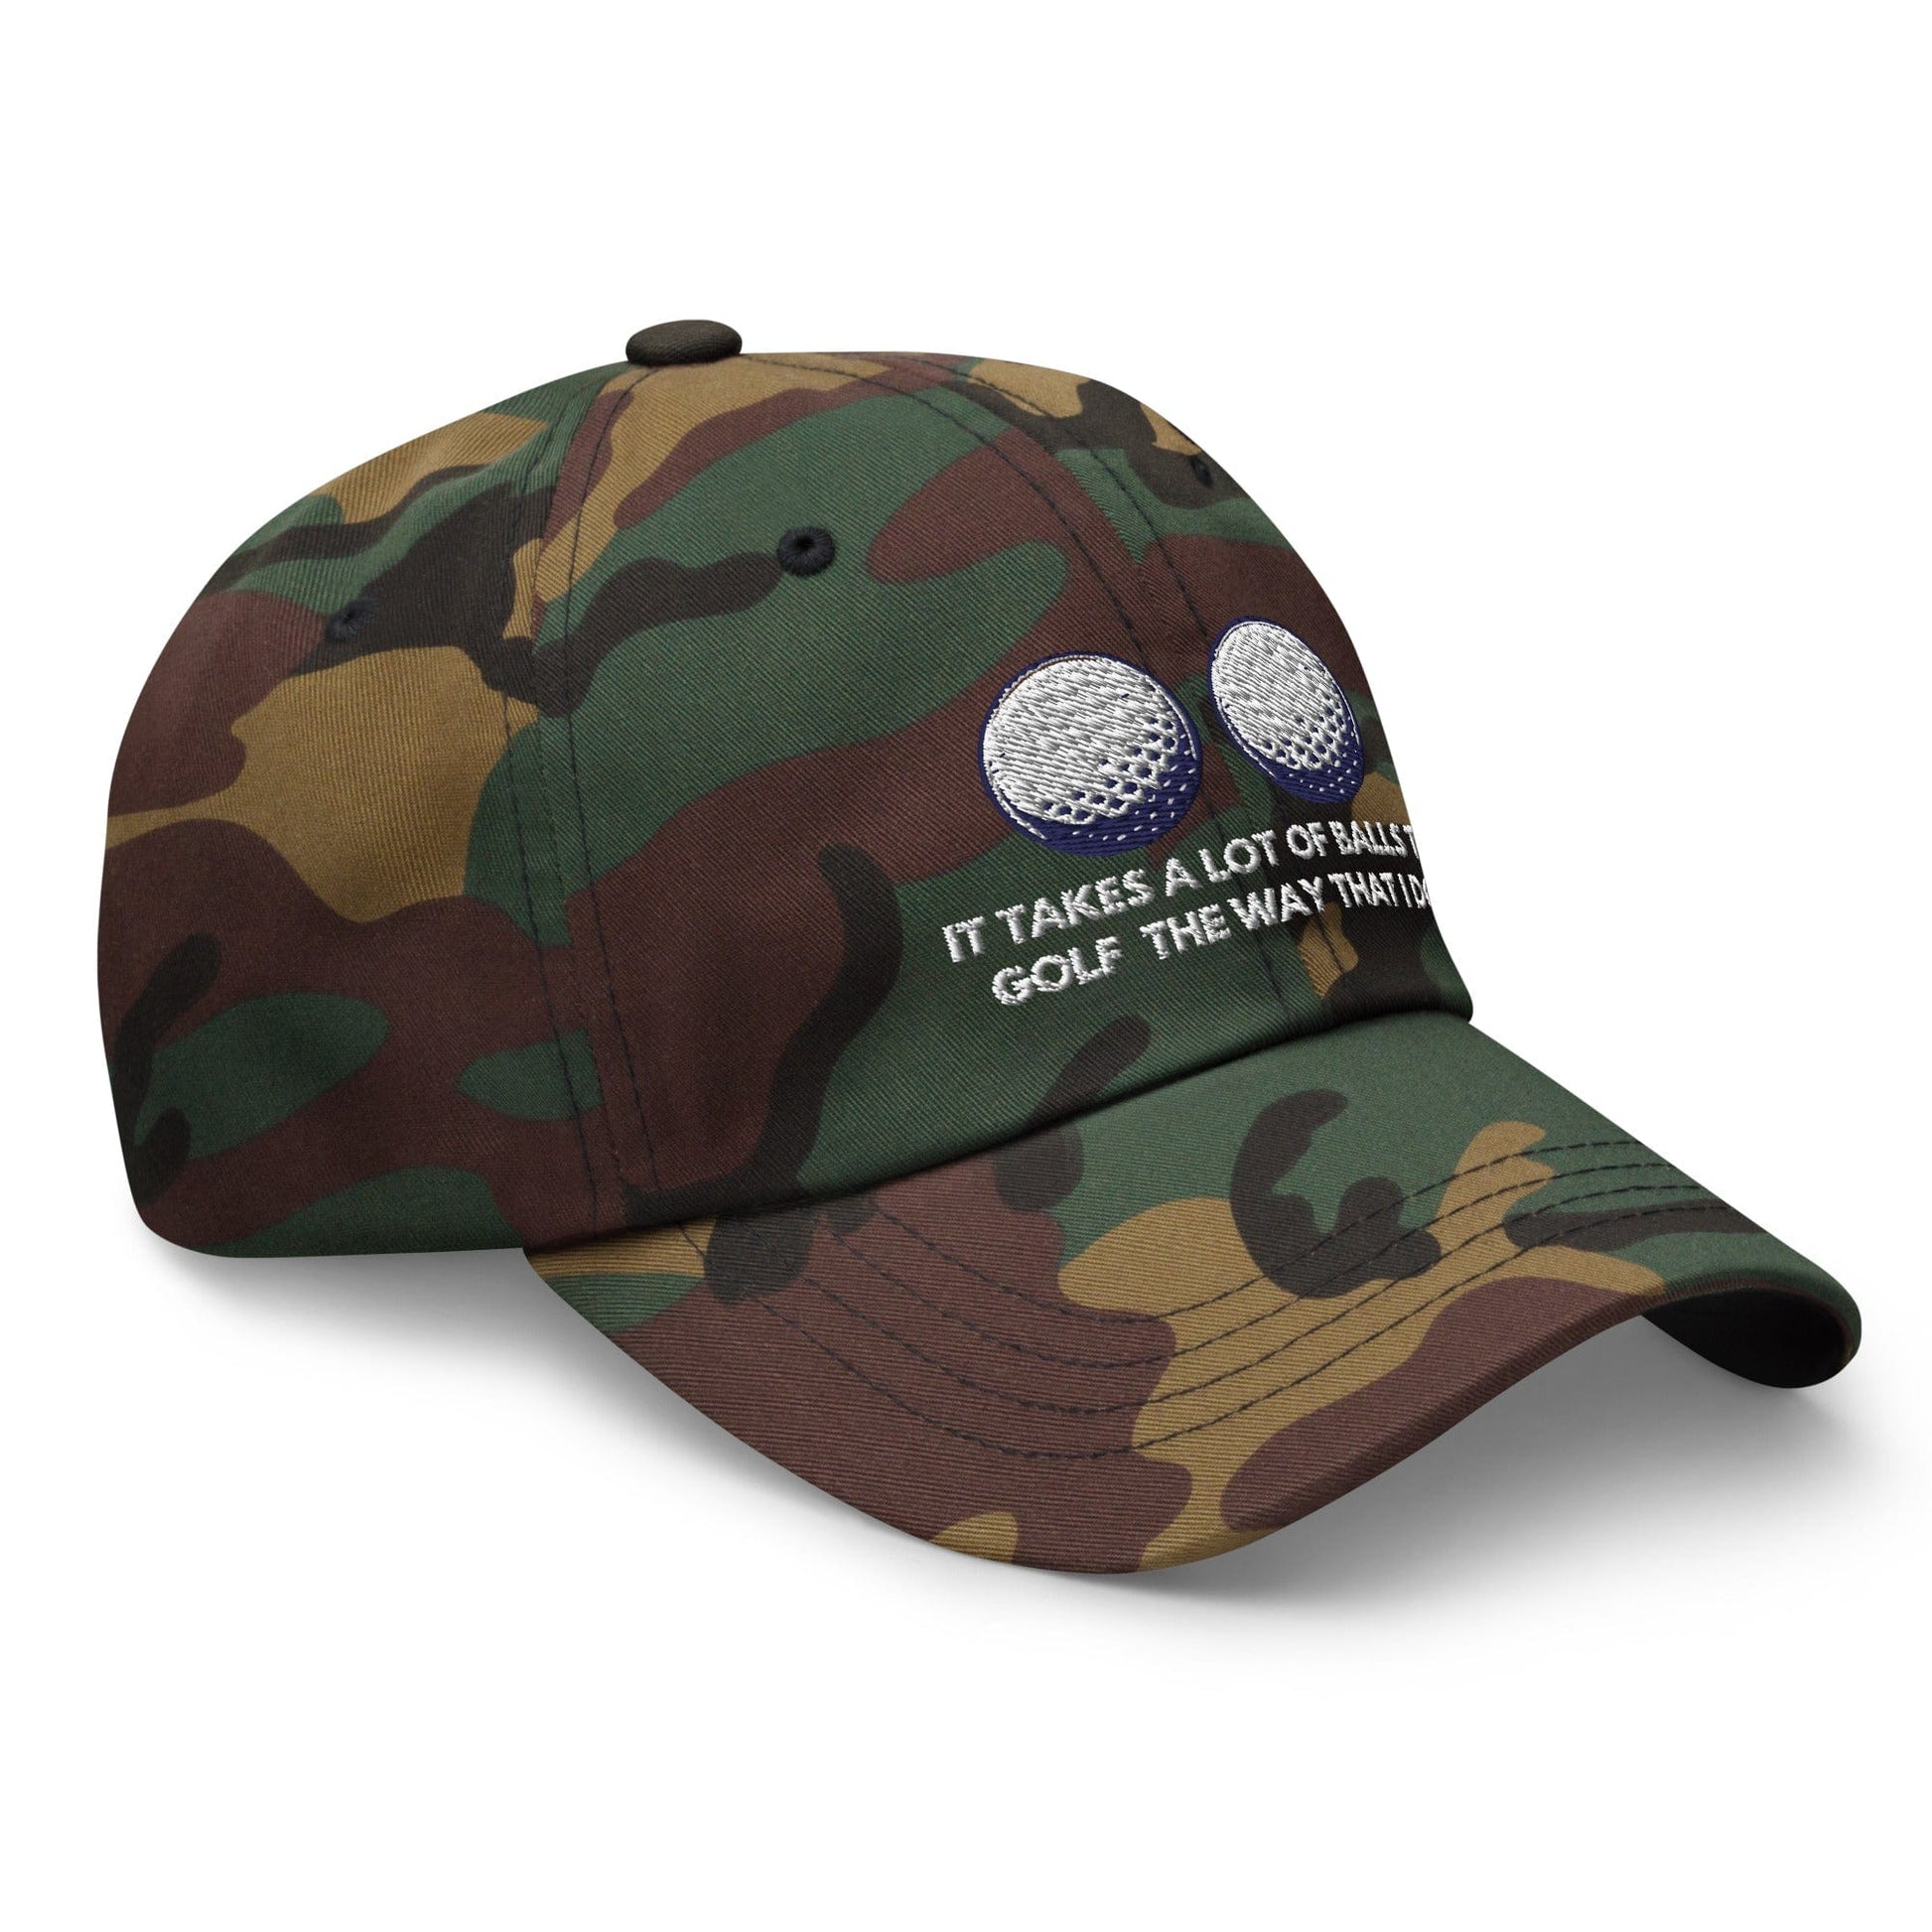 Funny Golfer Gifts  Dad Cap Green Camo It Takes a lot of Balls to Golf the way that I Do Cap